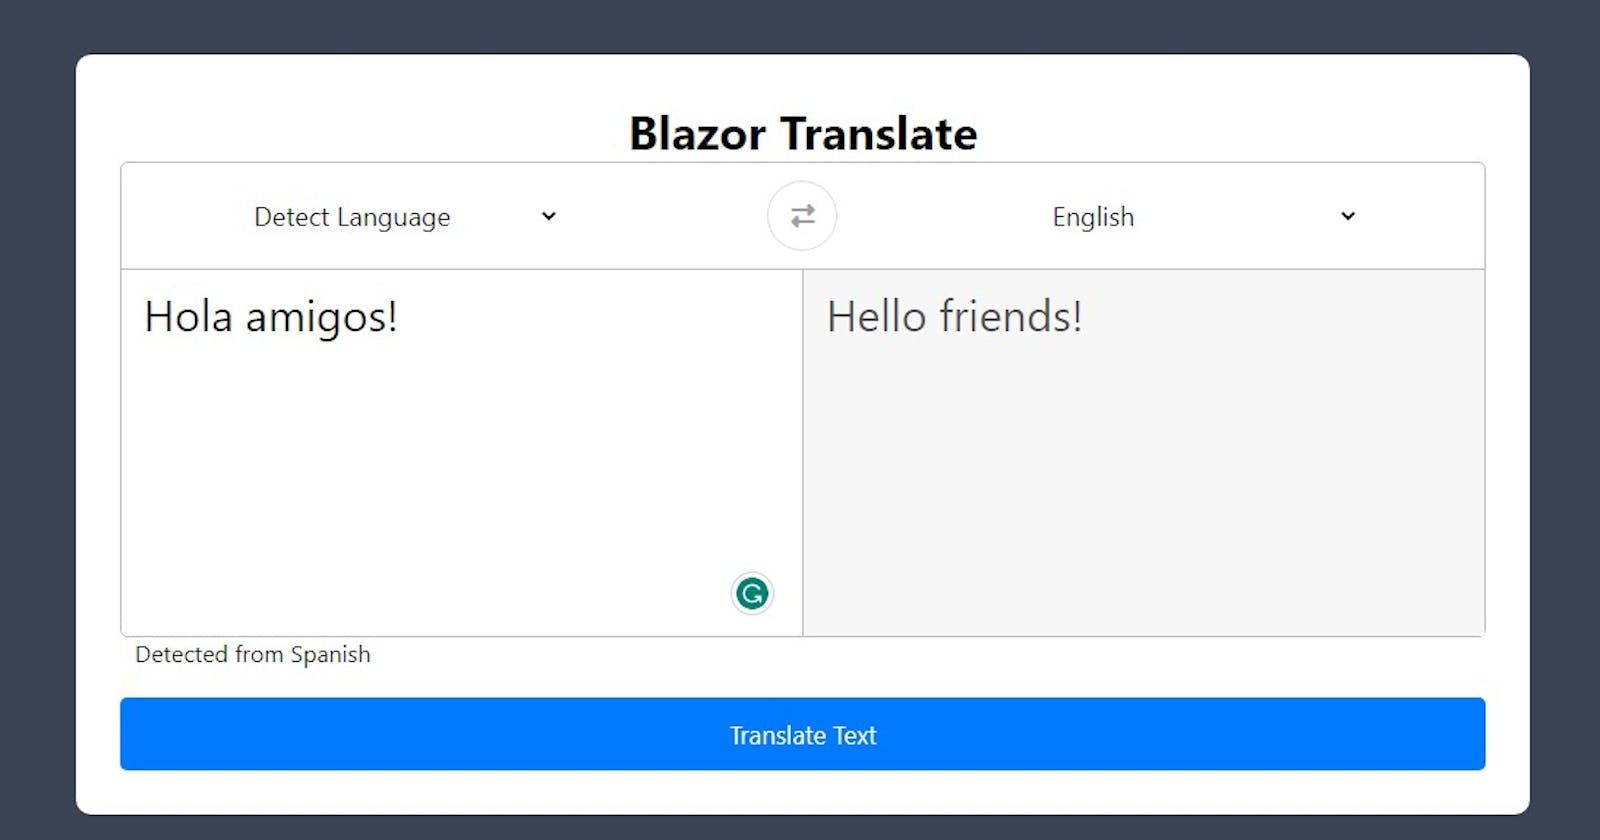 The Ultimate Guide to Creating a Google Translate Clone App from Scratch